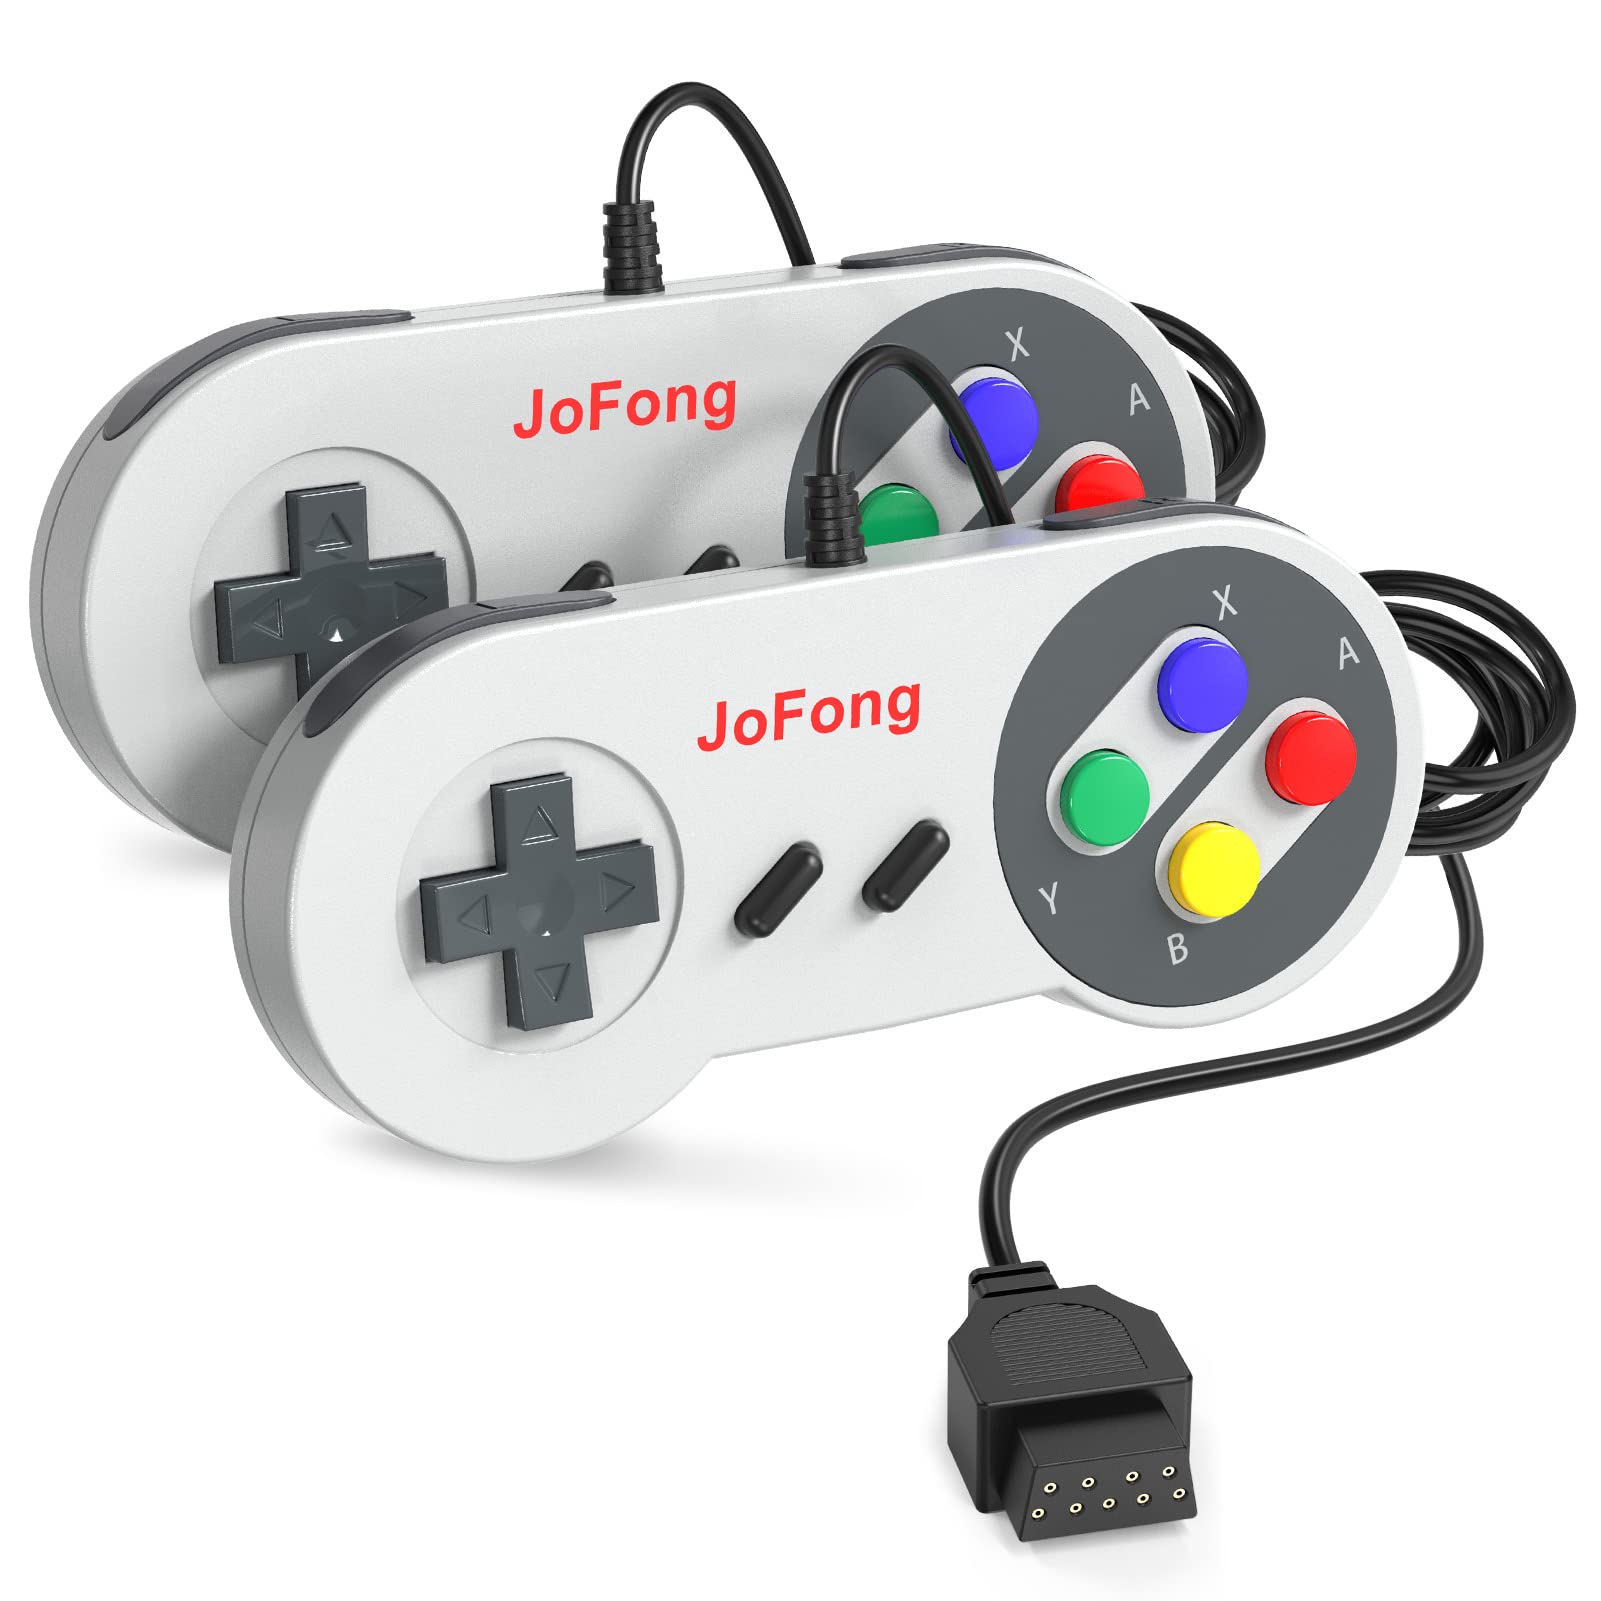 JoFong Retro Classic Controller, Suitable for AV 620, HD 621 HD 821 Classic Game Consoles Plug-and-Play Wired Video Gamepad-9 Pin Plug 2 Packs